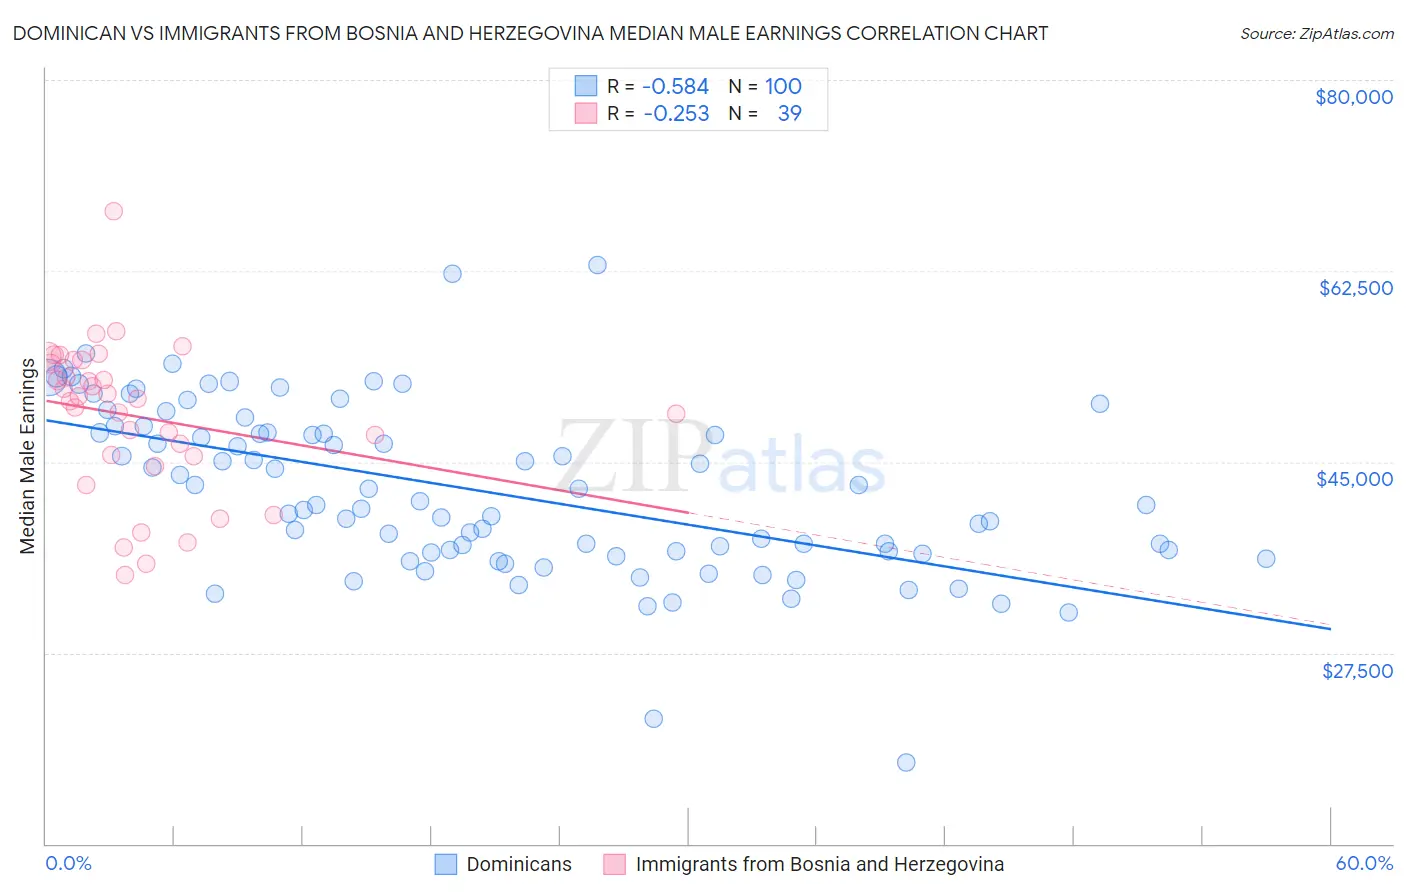 Dominican vs Immigrants from Bosnia and Herzegovina Median Male Earnings